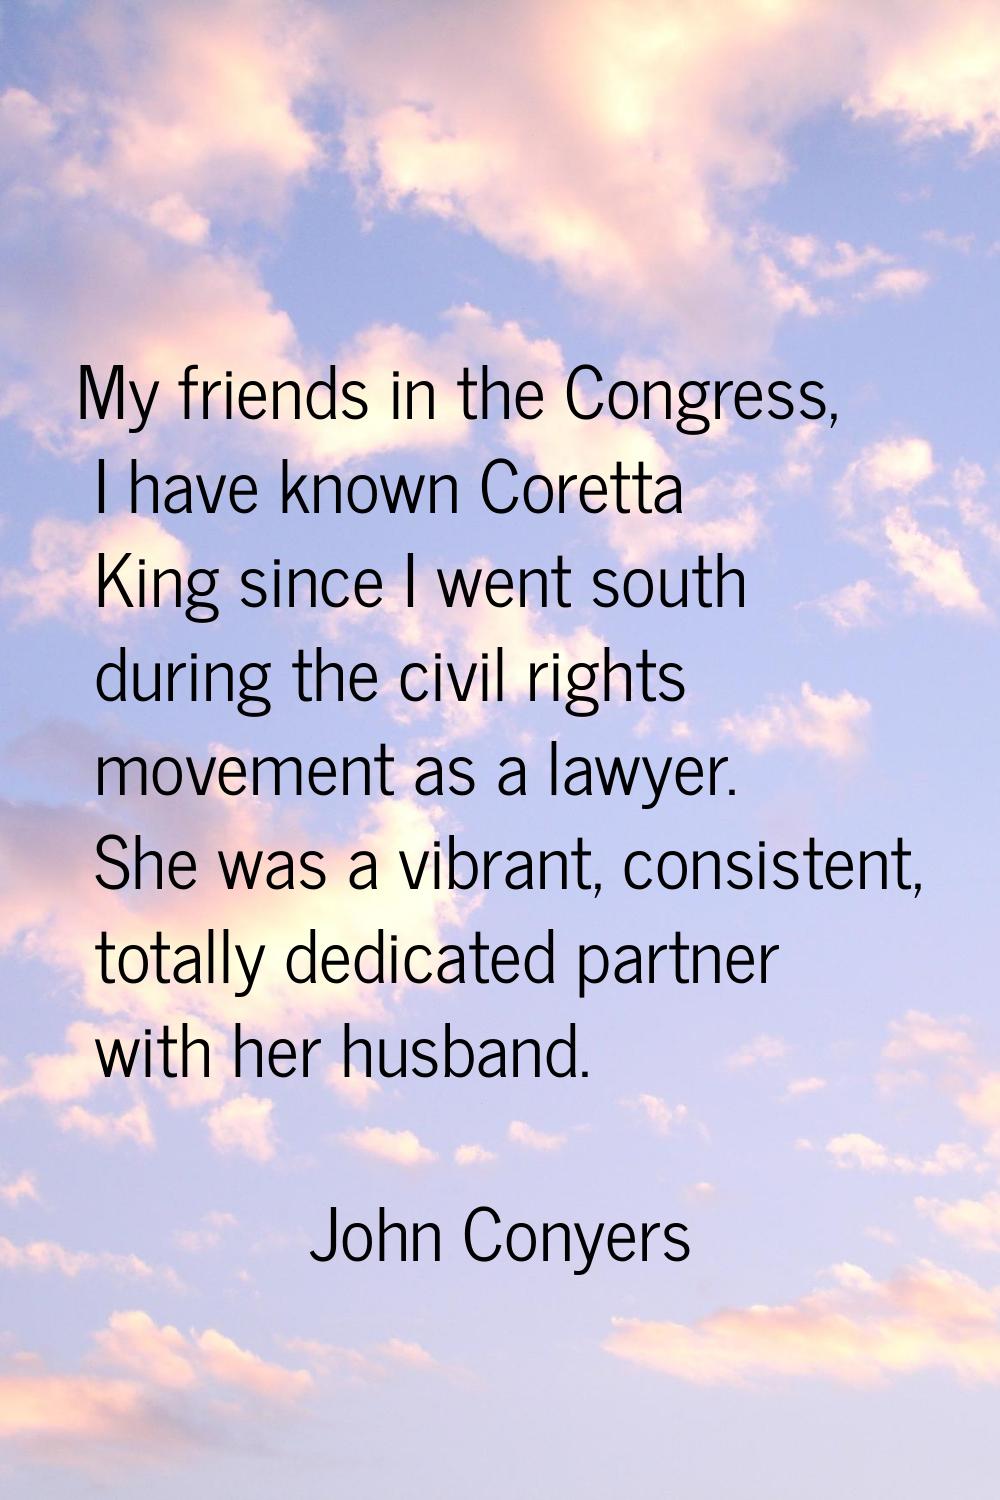 My friends in the Congress, I have known Coretta King since I went south during the civil rights mo